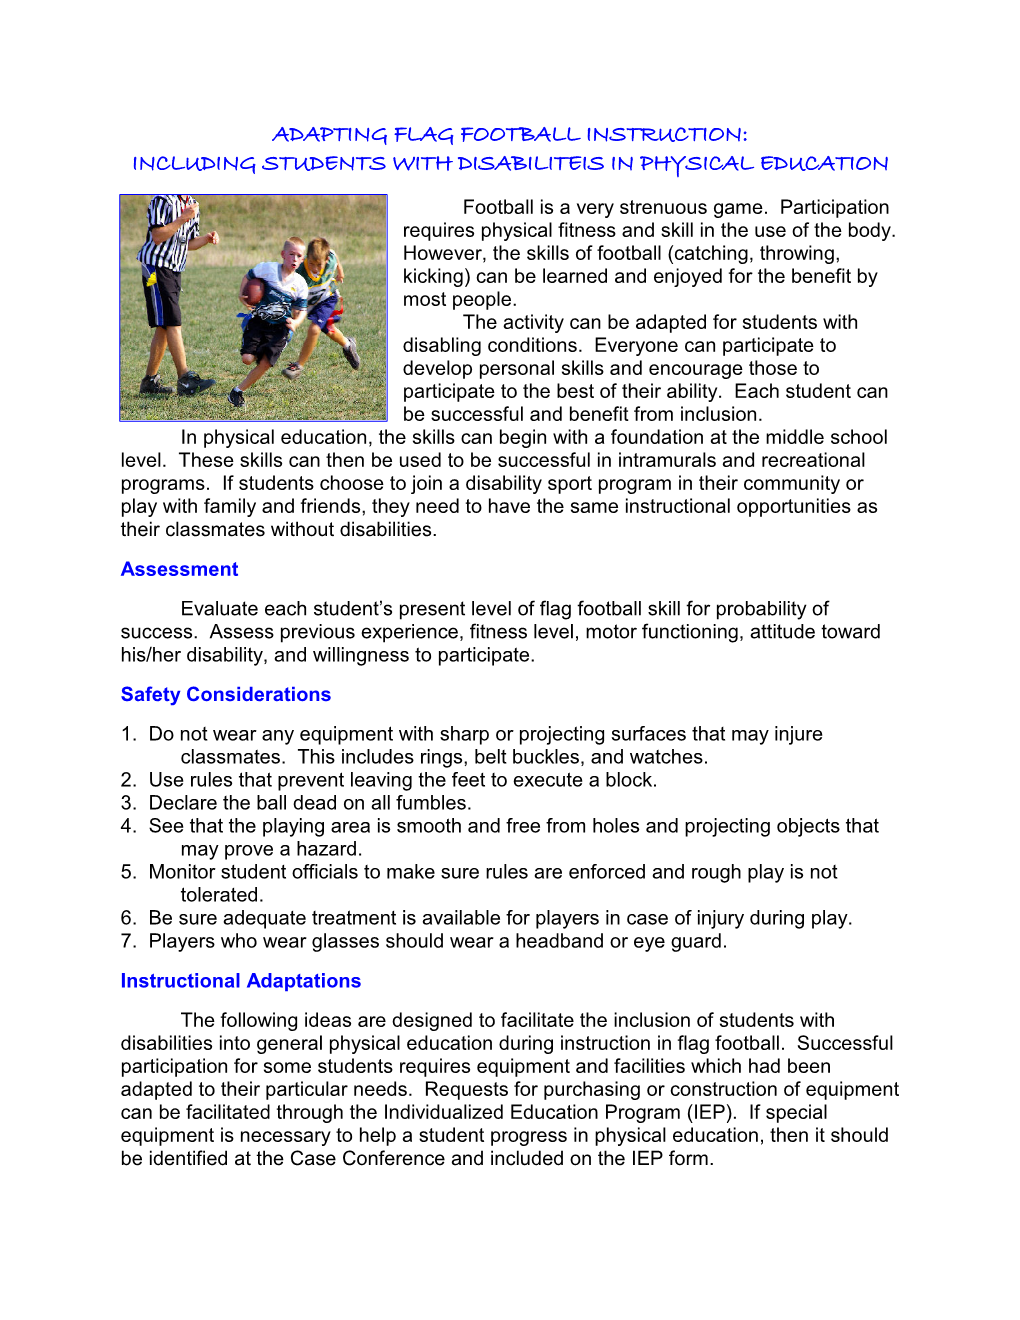 Adapting Flag Football Instruction: Including Students with Disabiliteis in Physical Education